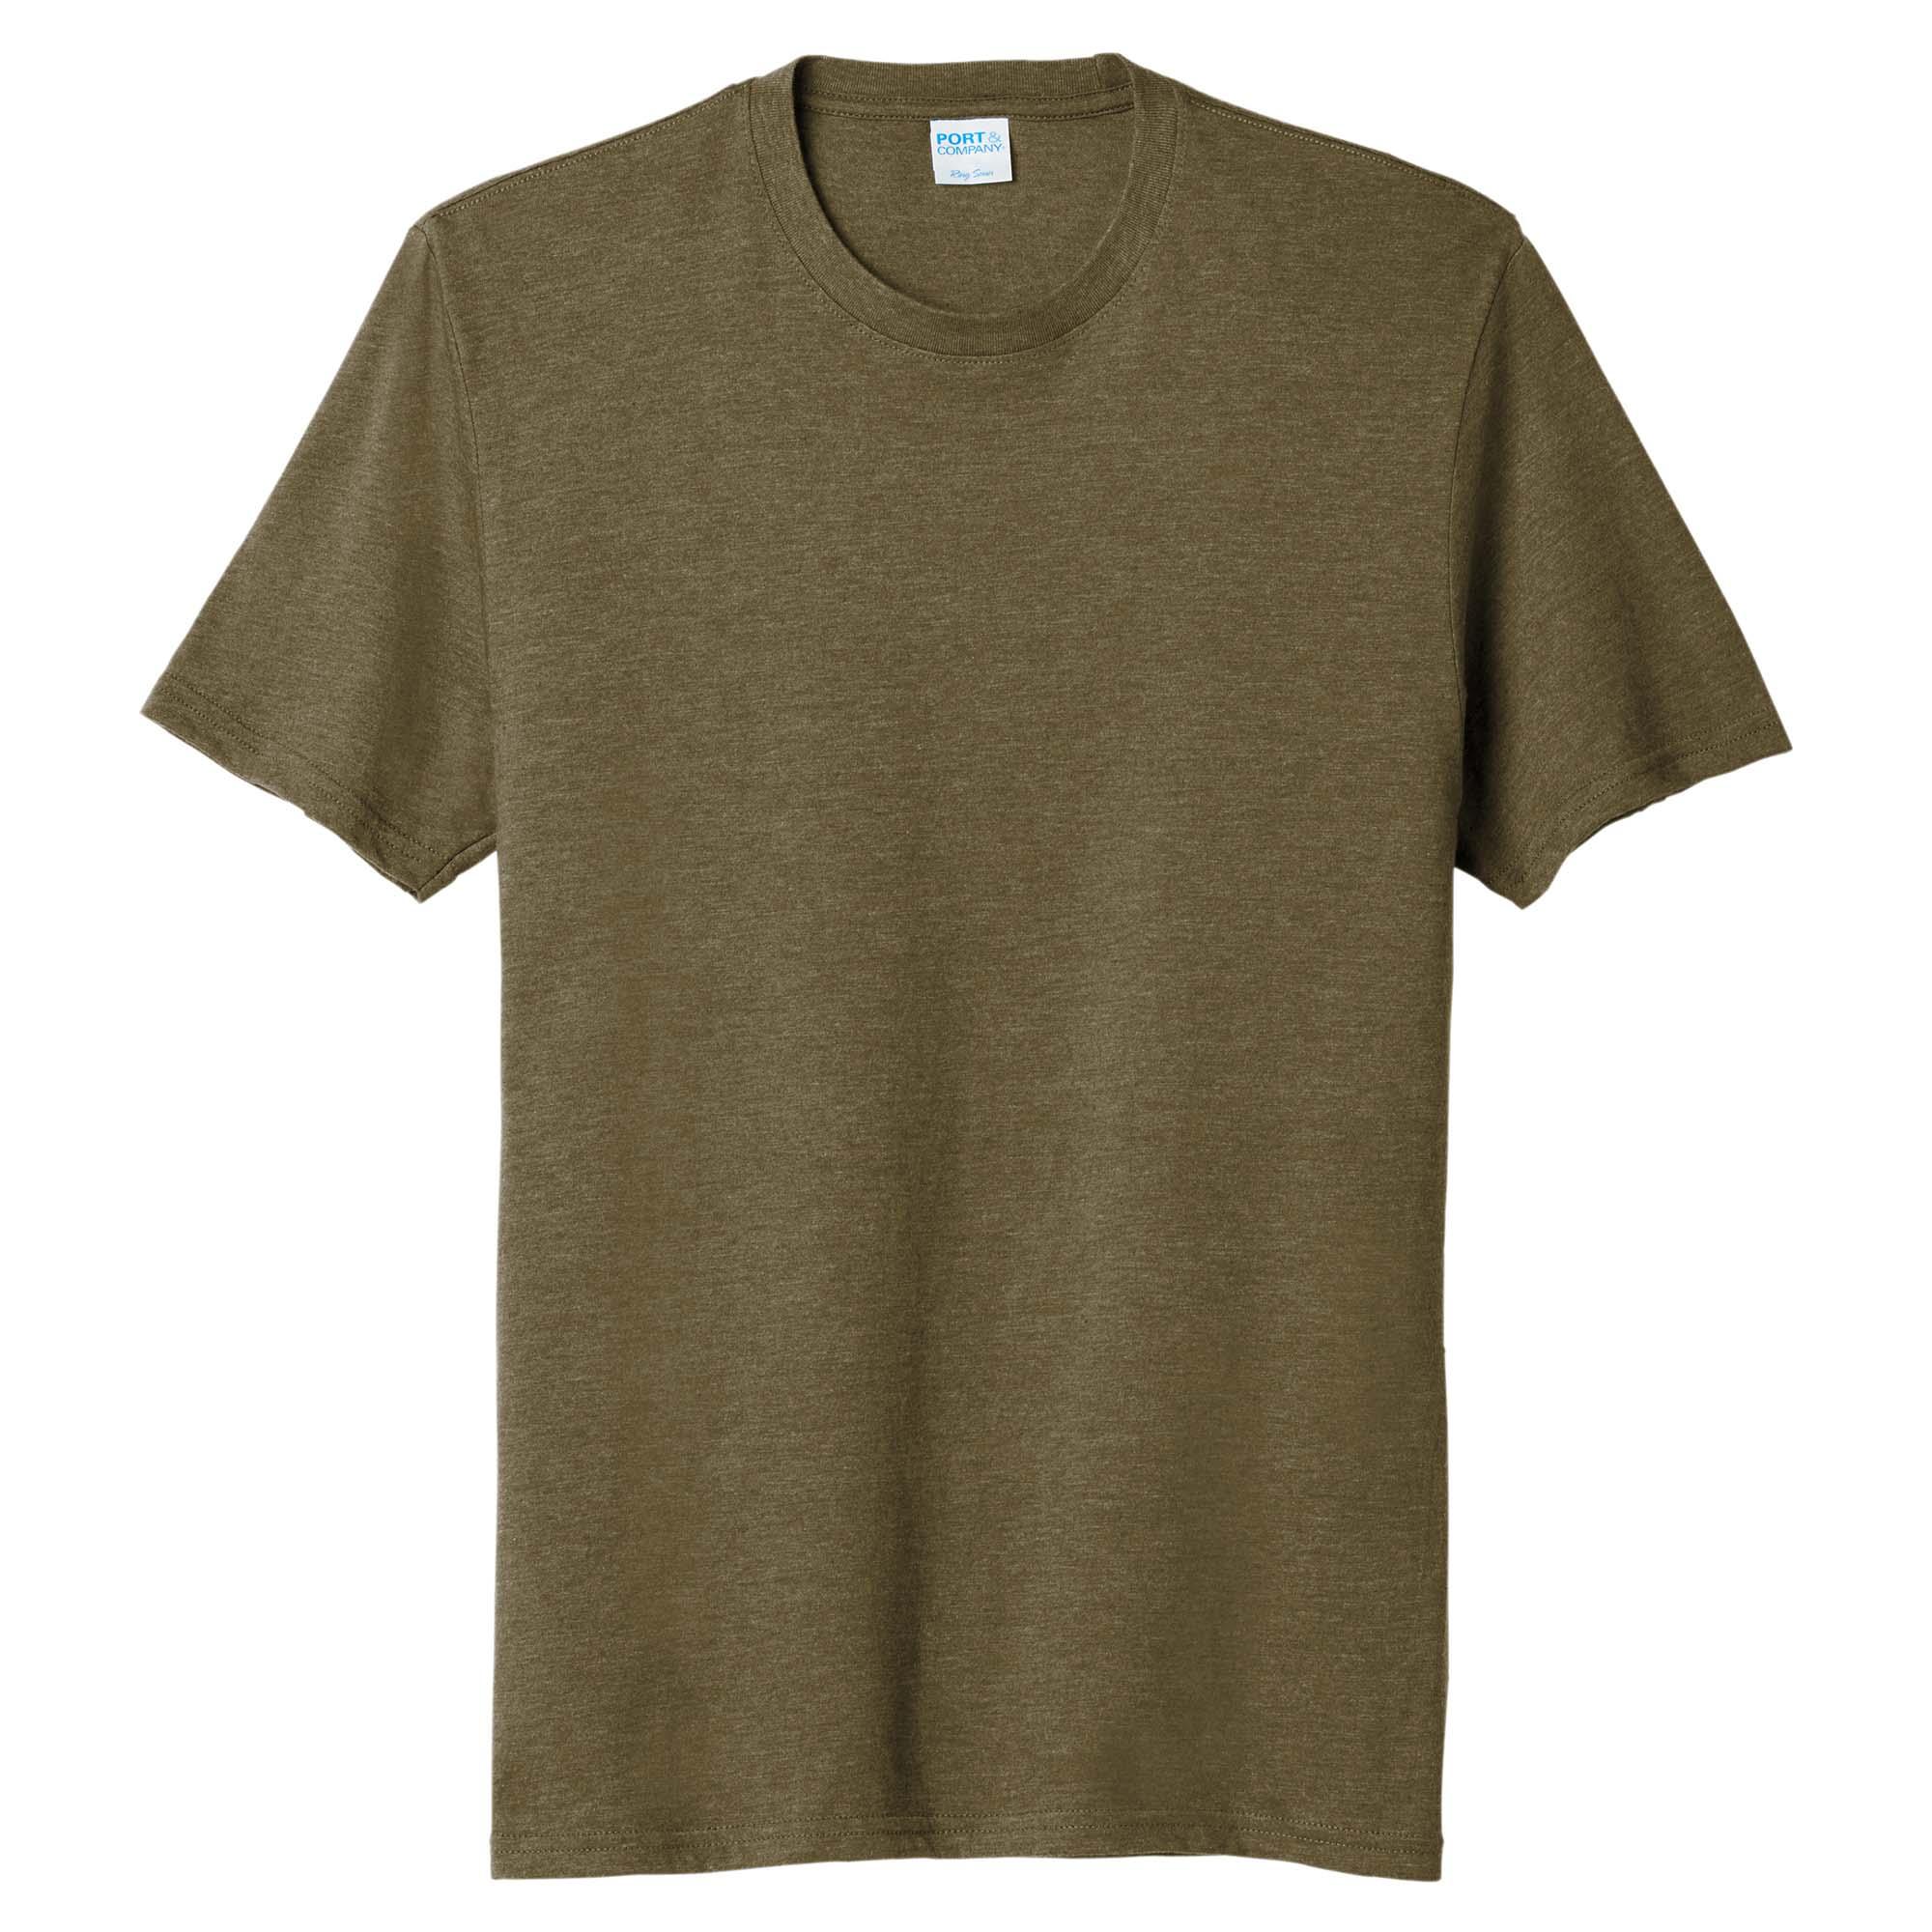 Live Music' Vintage Wash Tee– Copper Coyote